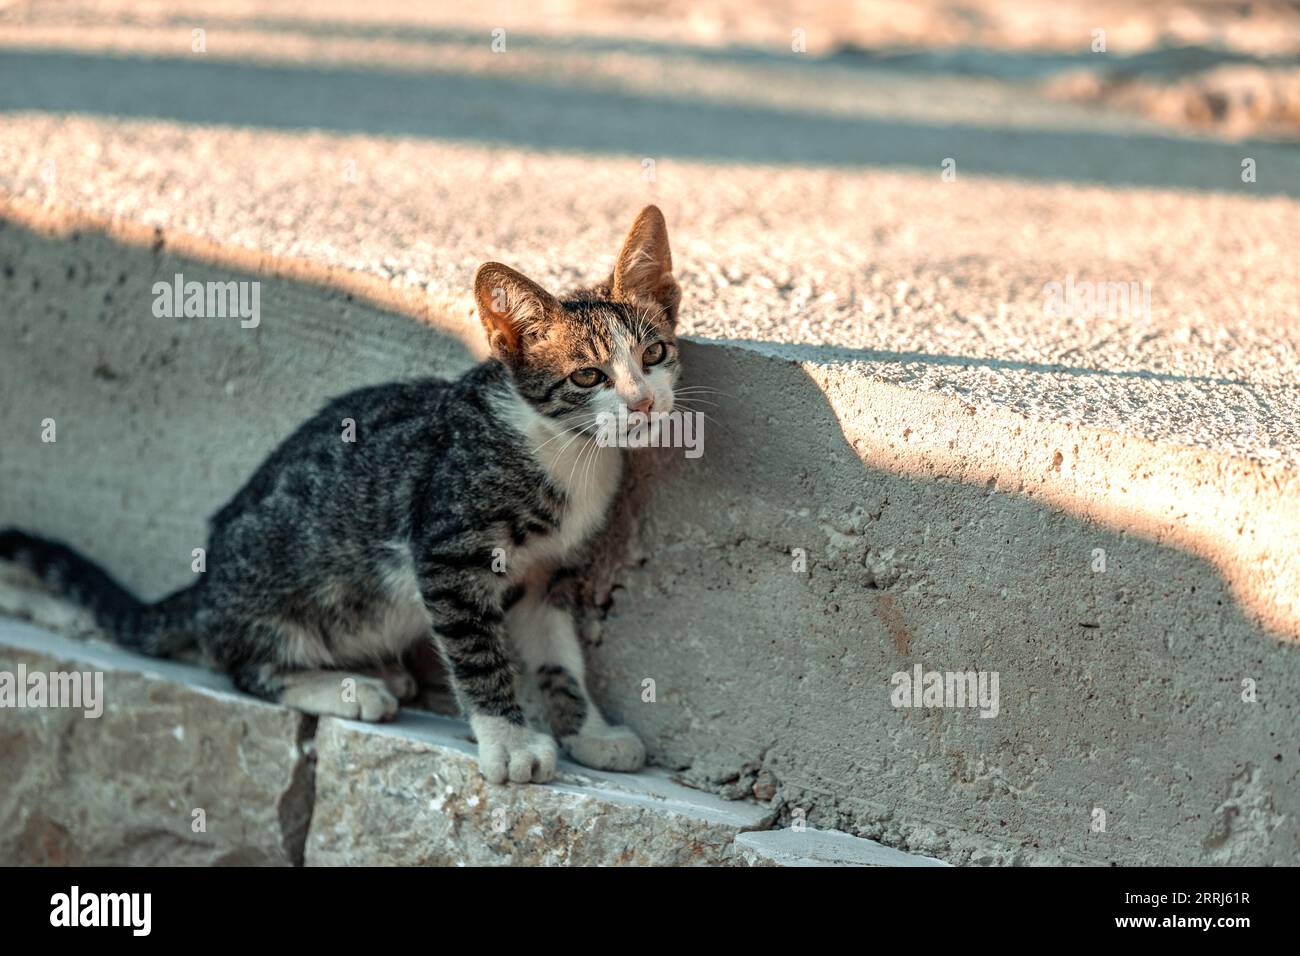 A kitten sitting on the floor. A domestic pet on the street. Small cat walking outside. Stock Photo